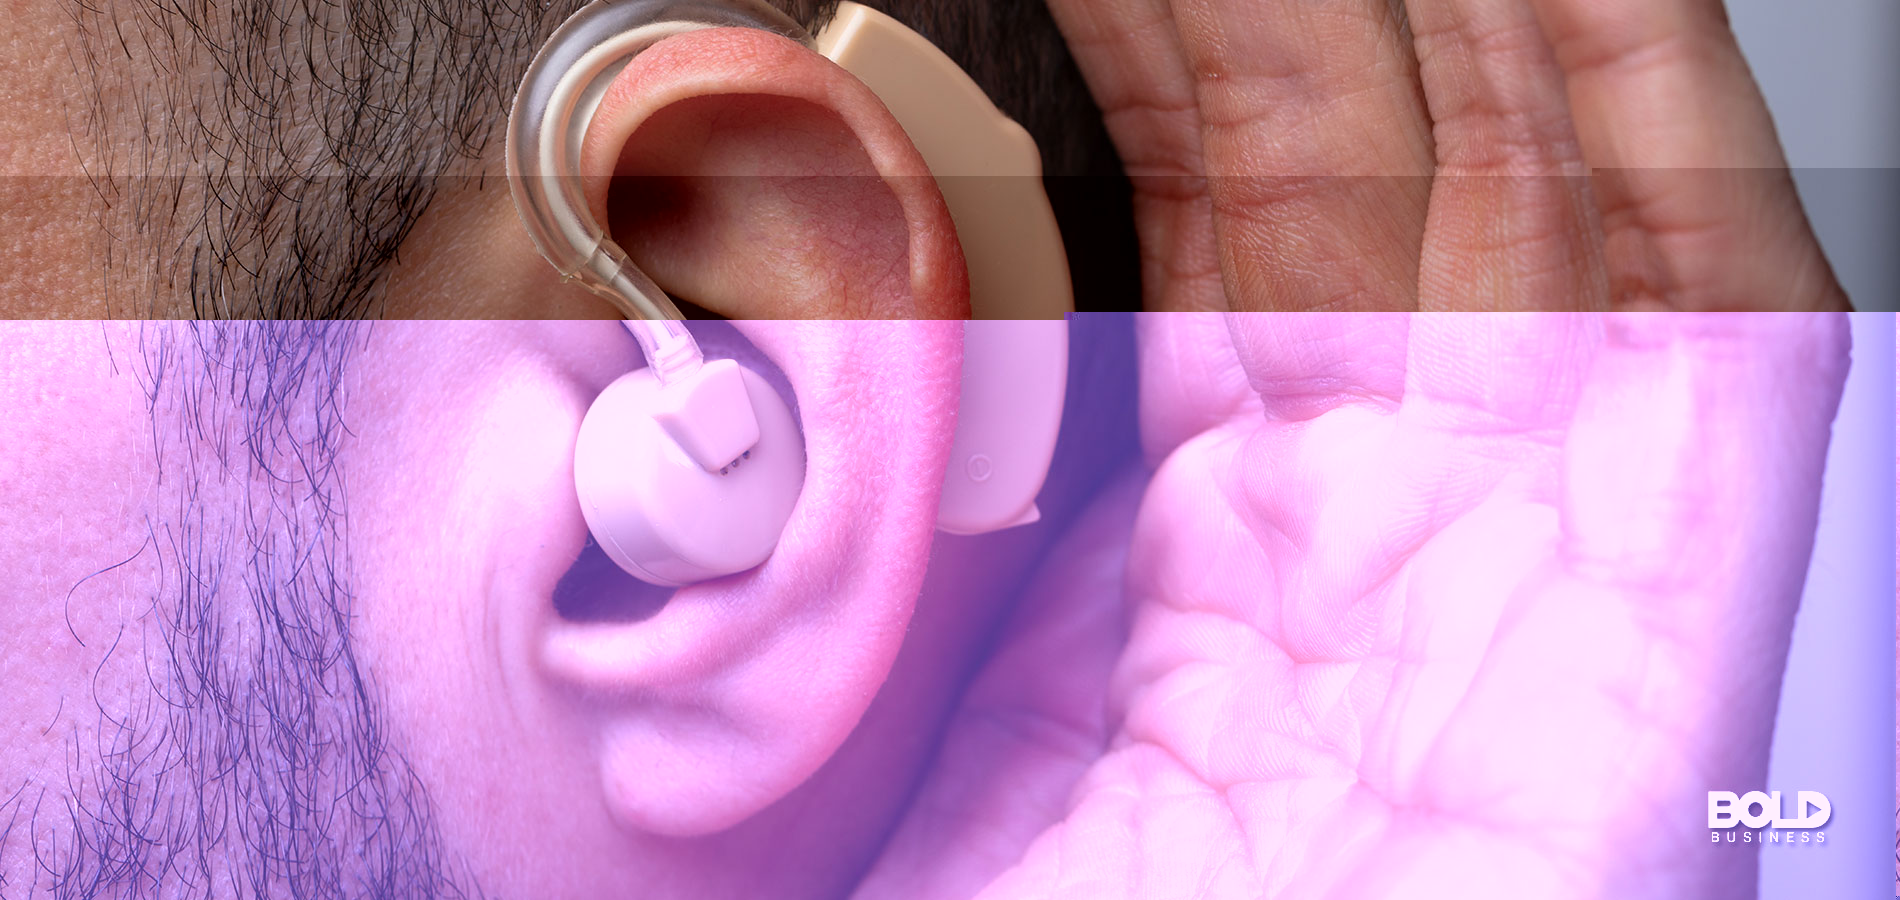 A dude with a hearing aid listening to purple